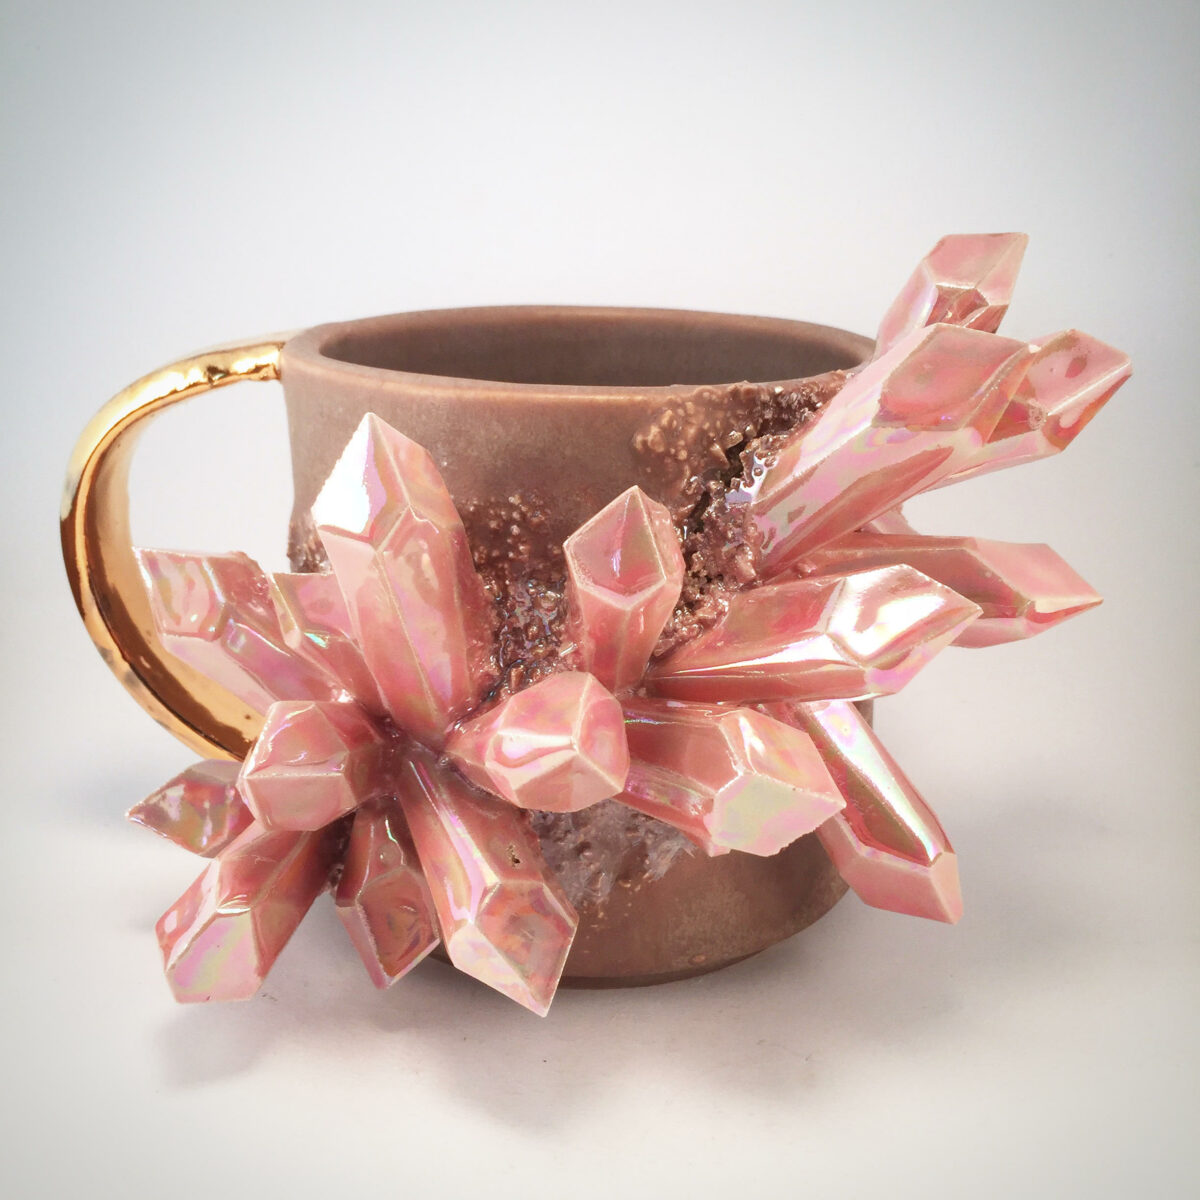 Lush Ceramic Vessels Decorated With Colorful Crystals By Collin Lynch 6